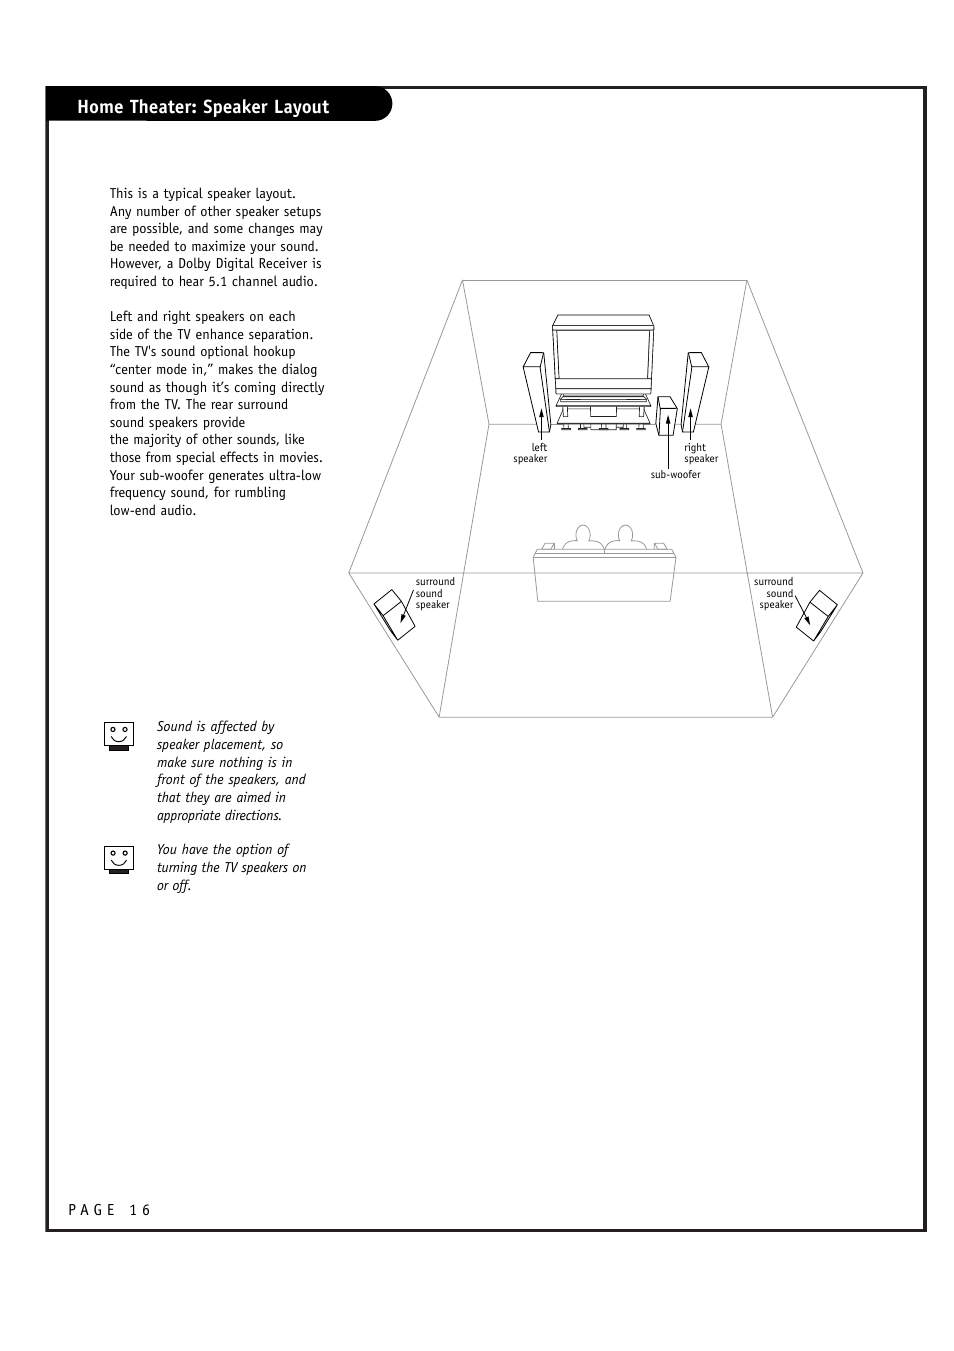 Home theater: speaker layout | LG RU-52SZ61D User Manual | Page 16 / 60